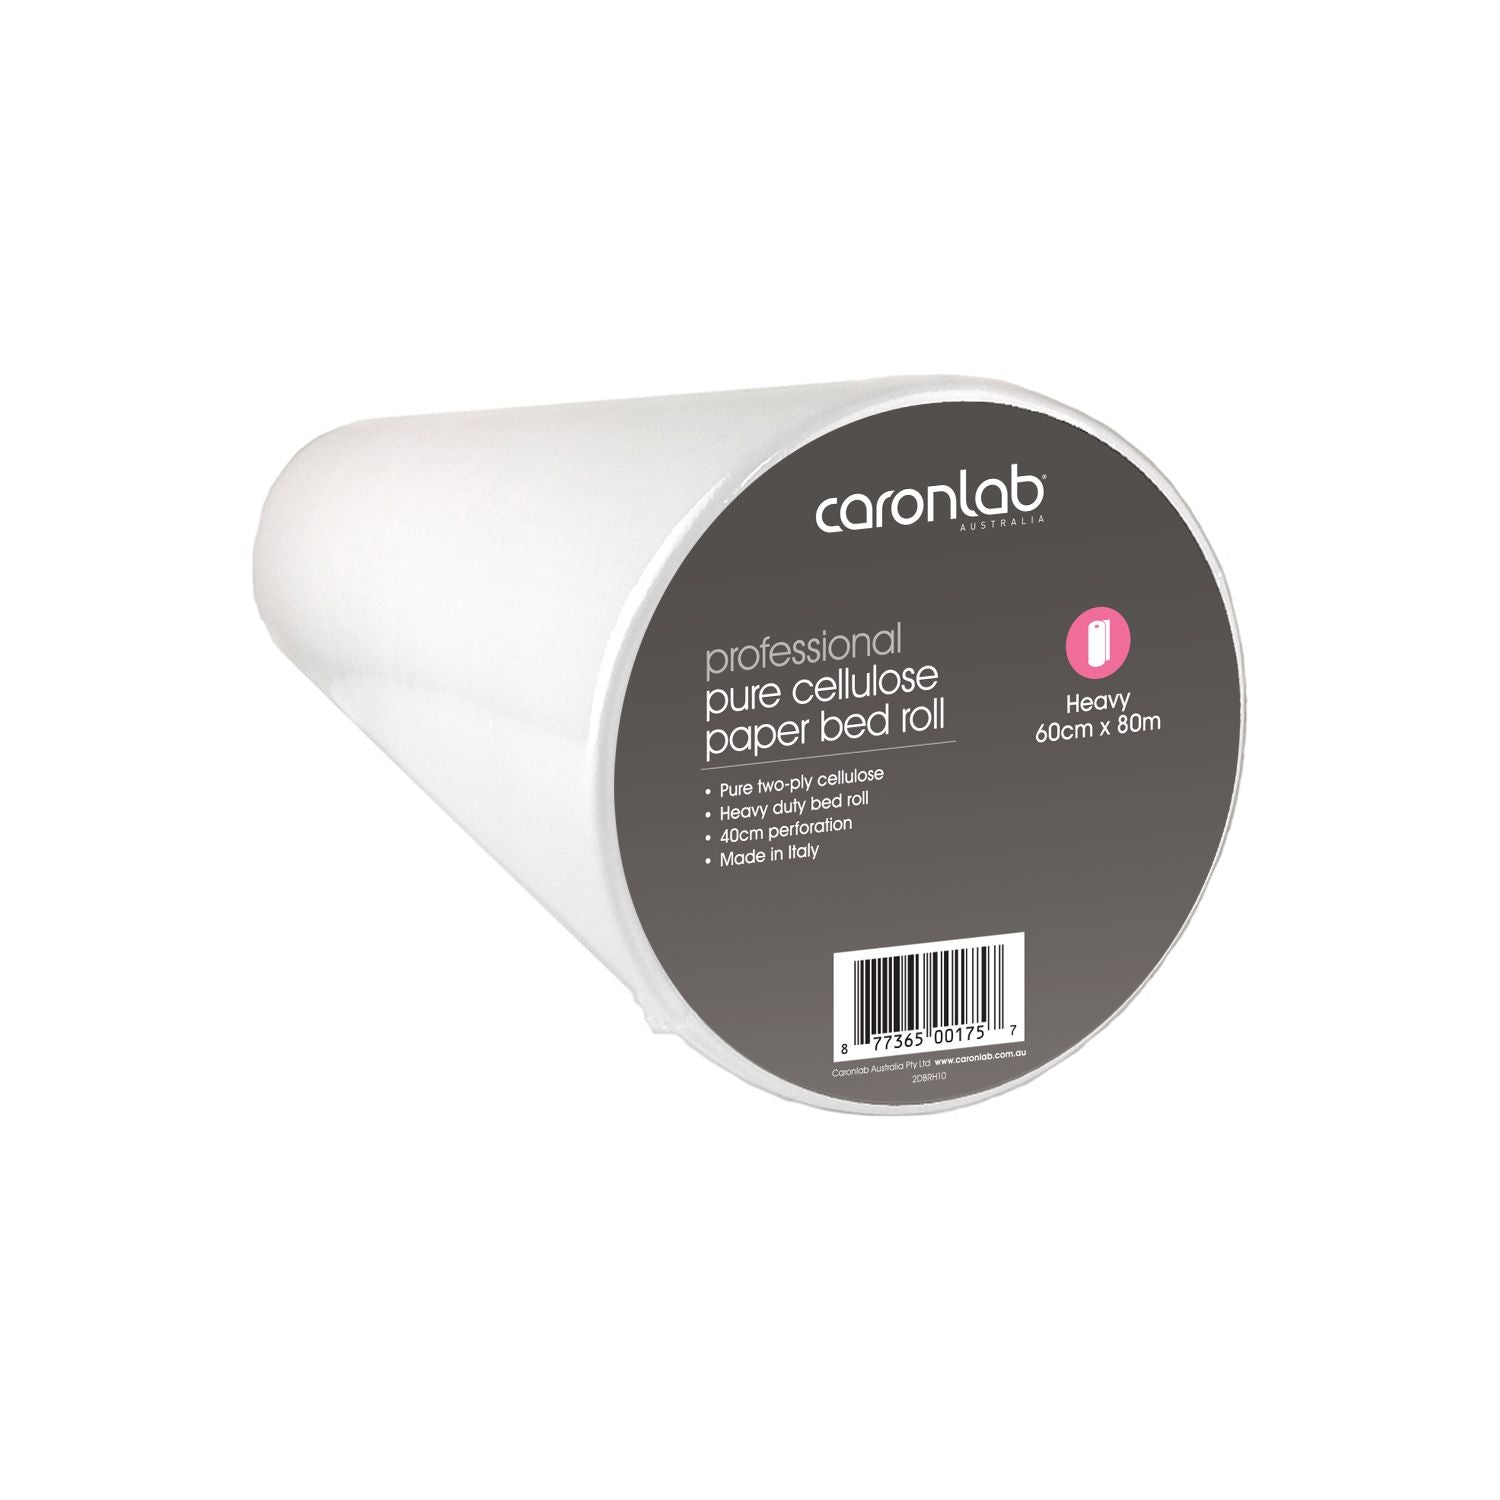 Caronlab Pure Cellulose Paper Bed Roll Heavy (40cm perforation) 60cm x 80mt